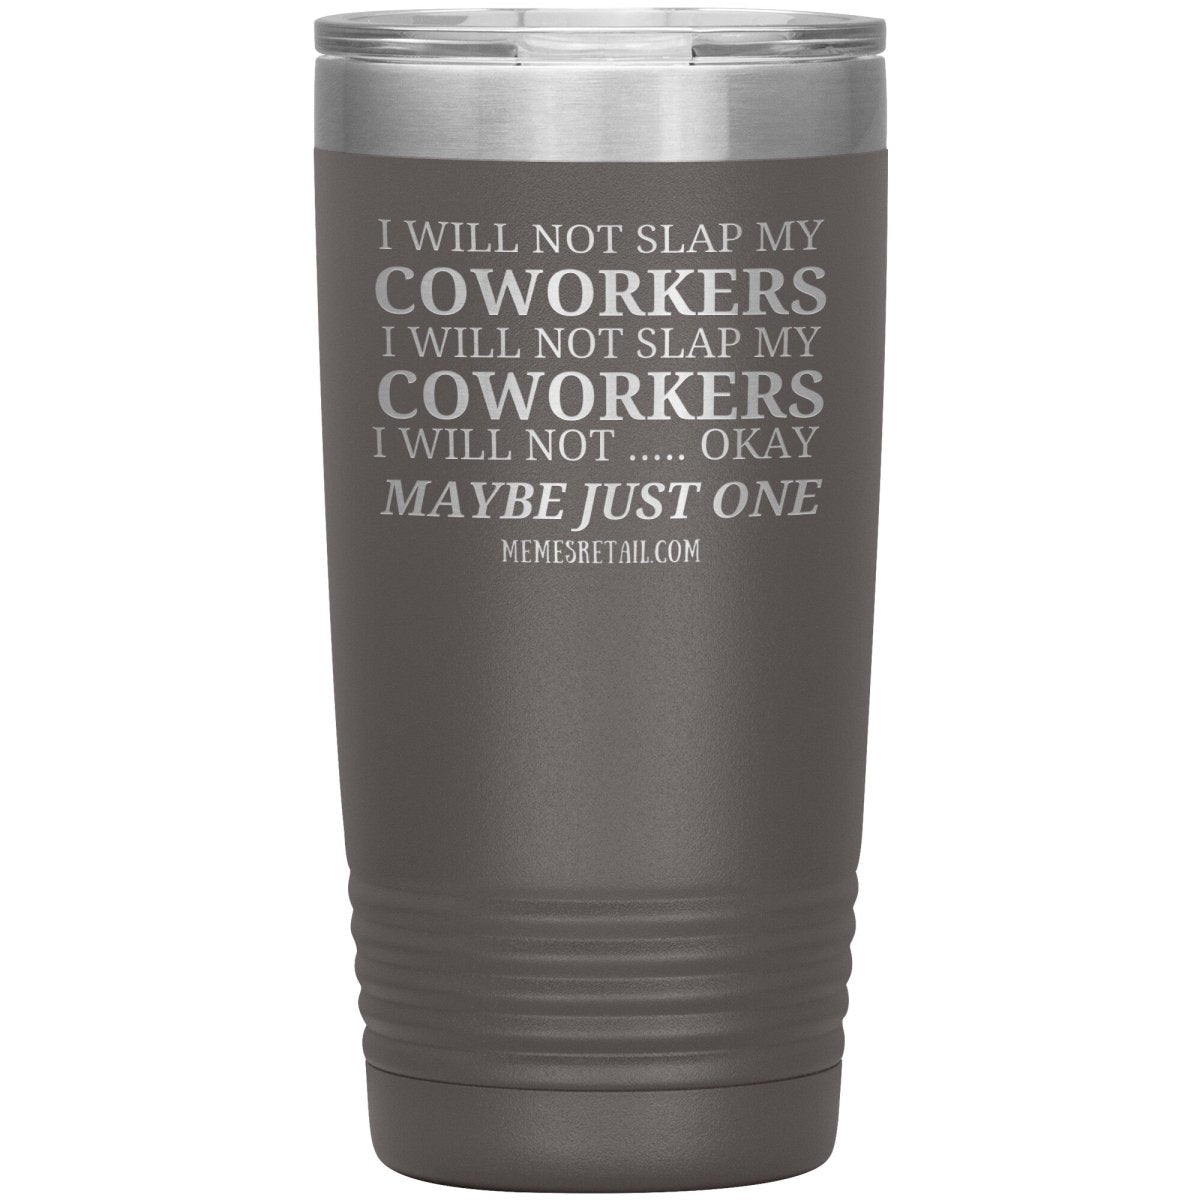 I will not slap my coworker… Tumblers, 20oz Insulated Tumbler / Pewter - MemesRetail.com